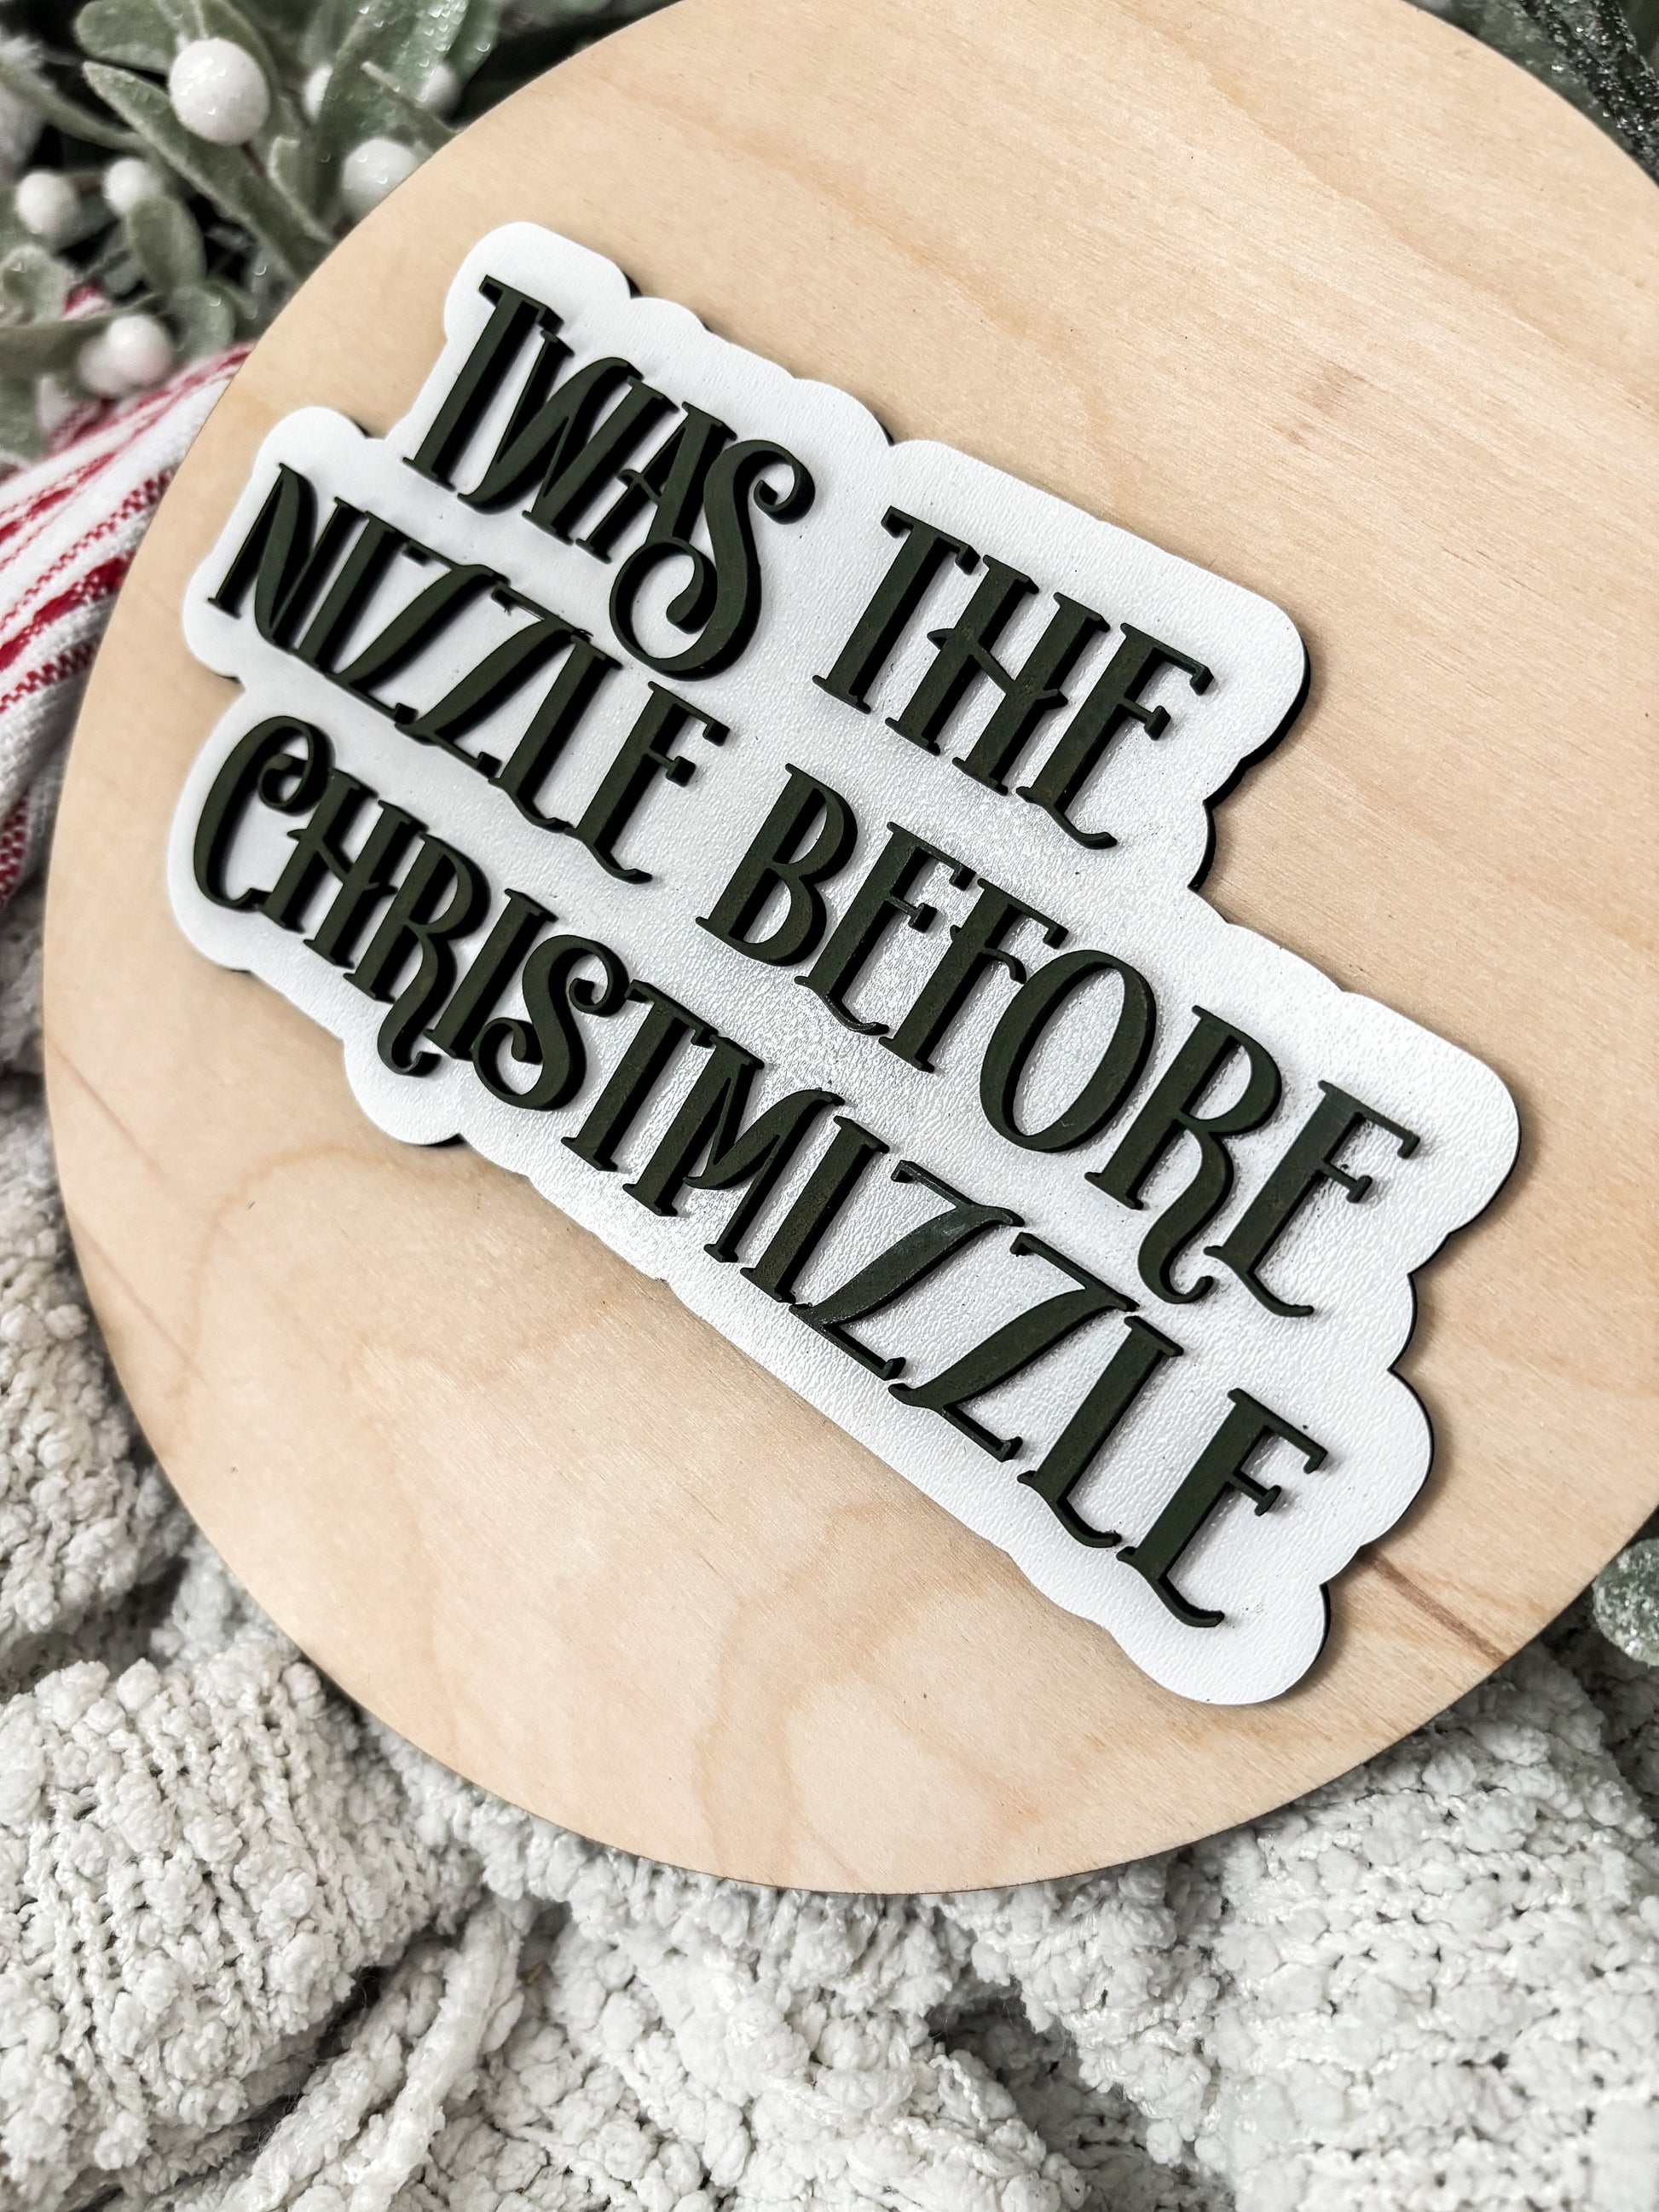 Twas the Nizzle Before Christmizzle Sign, Funny Christmas sign, Christmas Hanging Decor, Christmas Arch Decor, Modern Decorations, Snoop